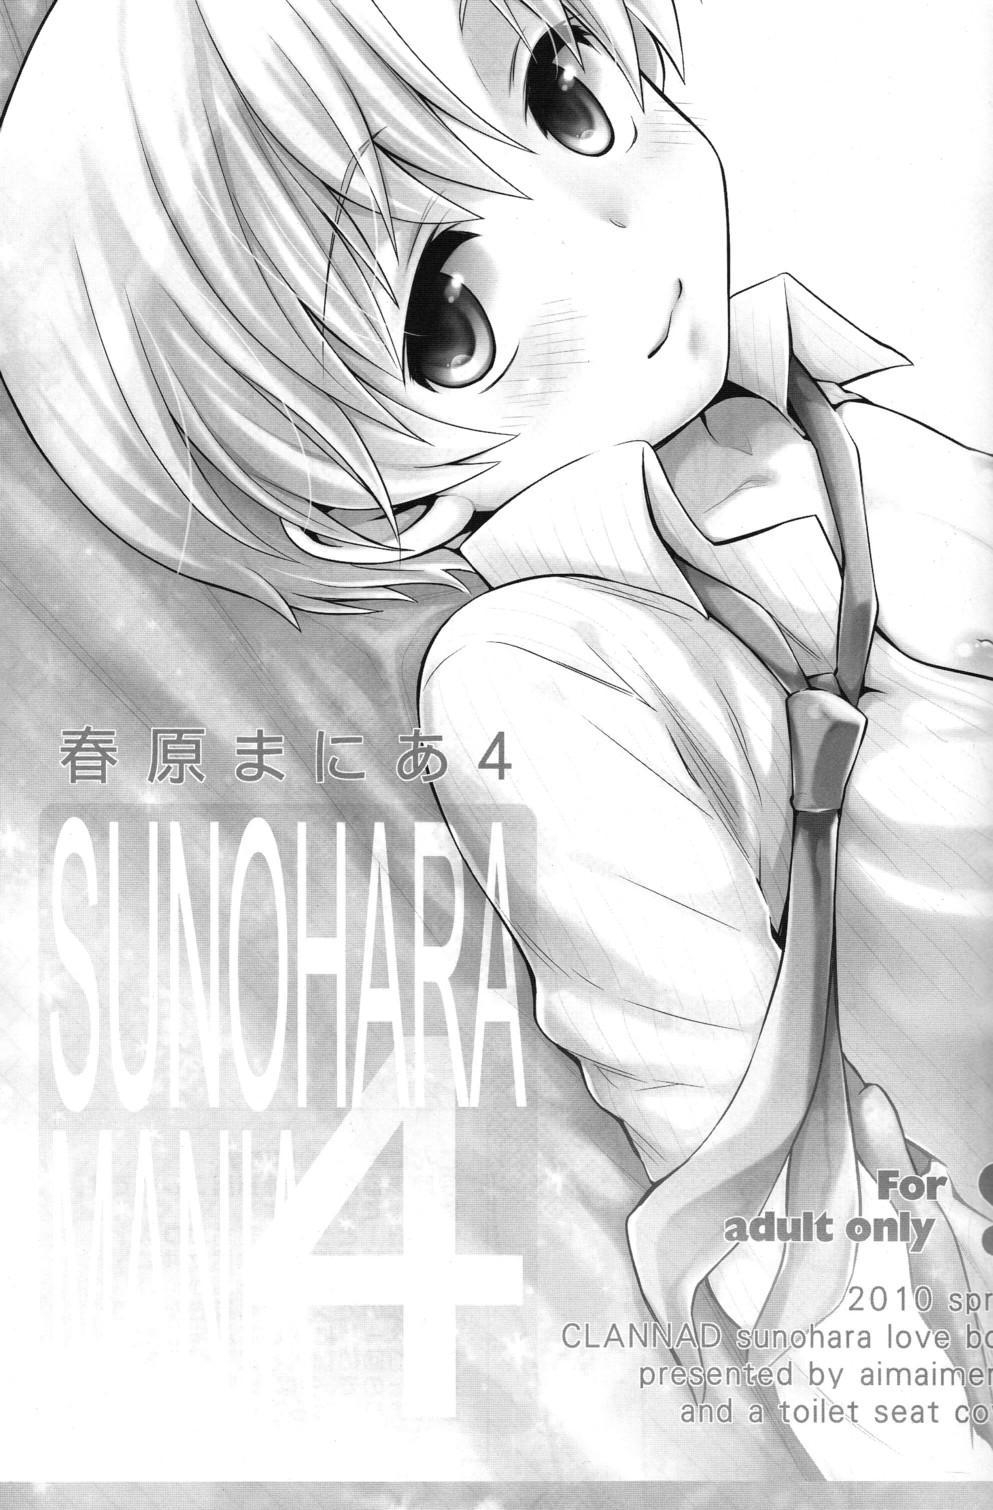 Hung Sunohara Mania 4 - Clannad Couples Fucking - Page 3